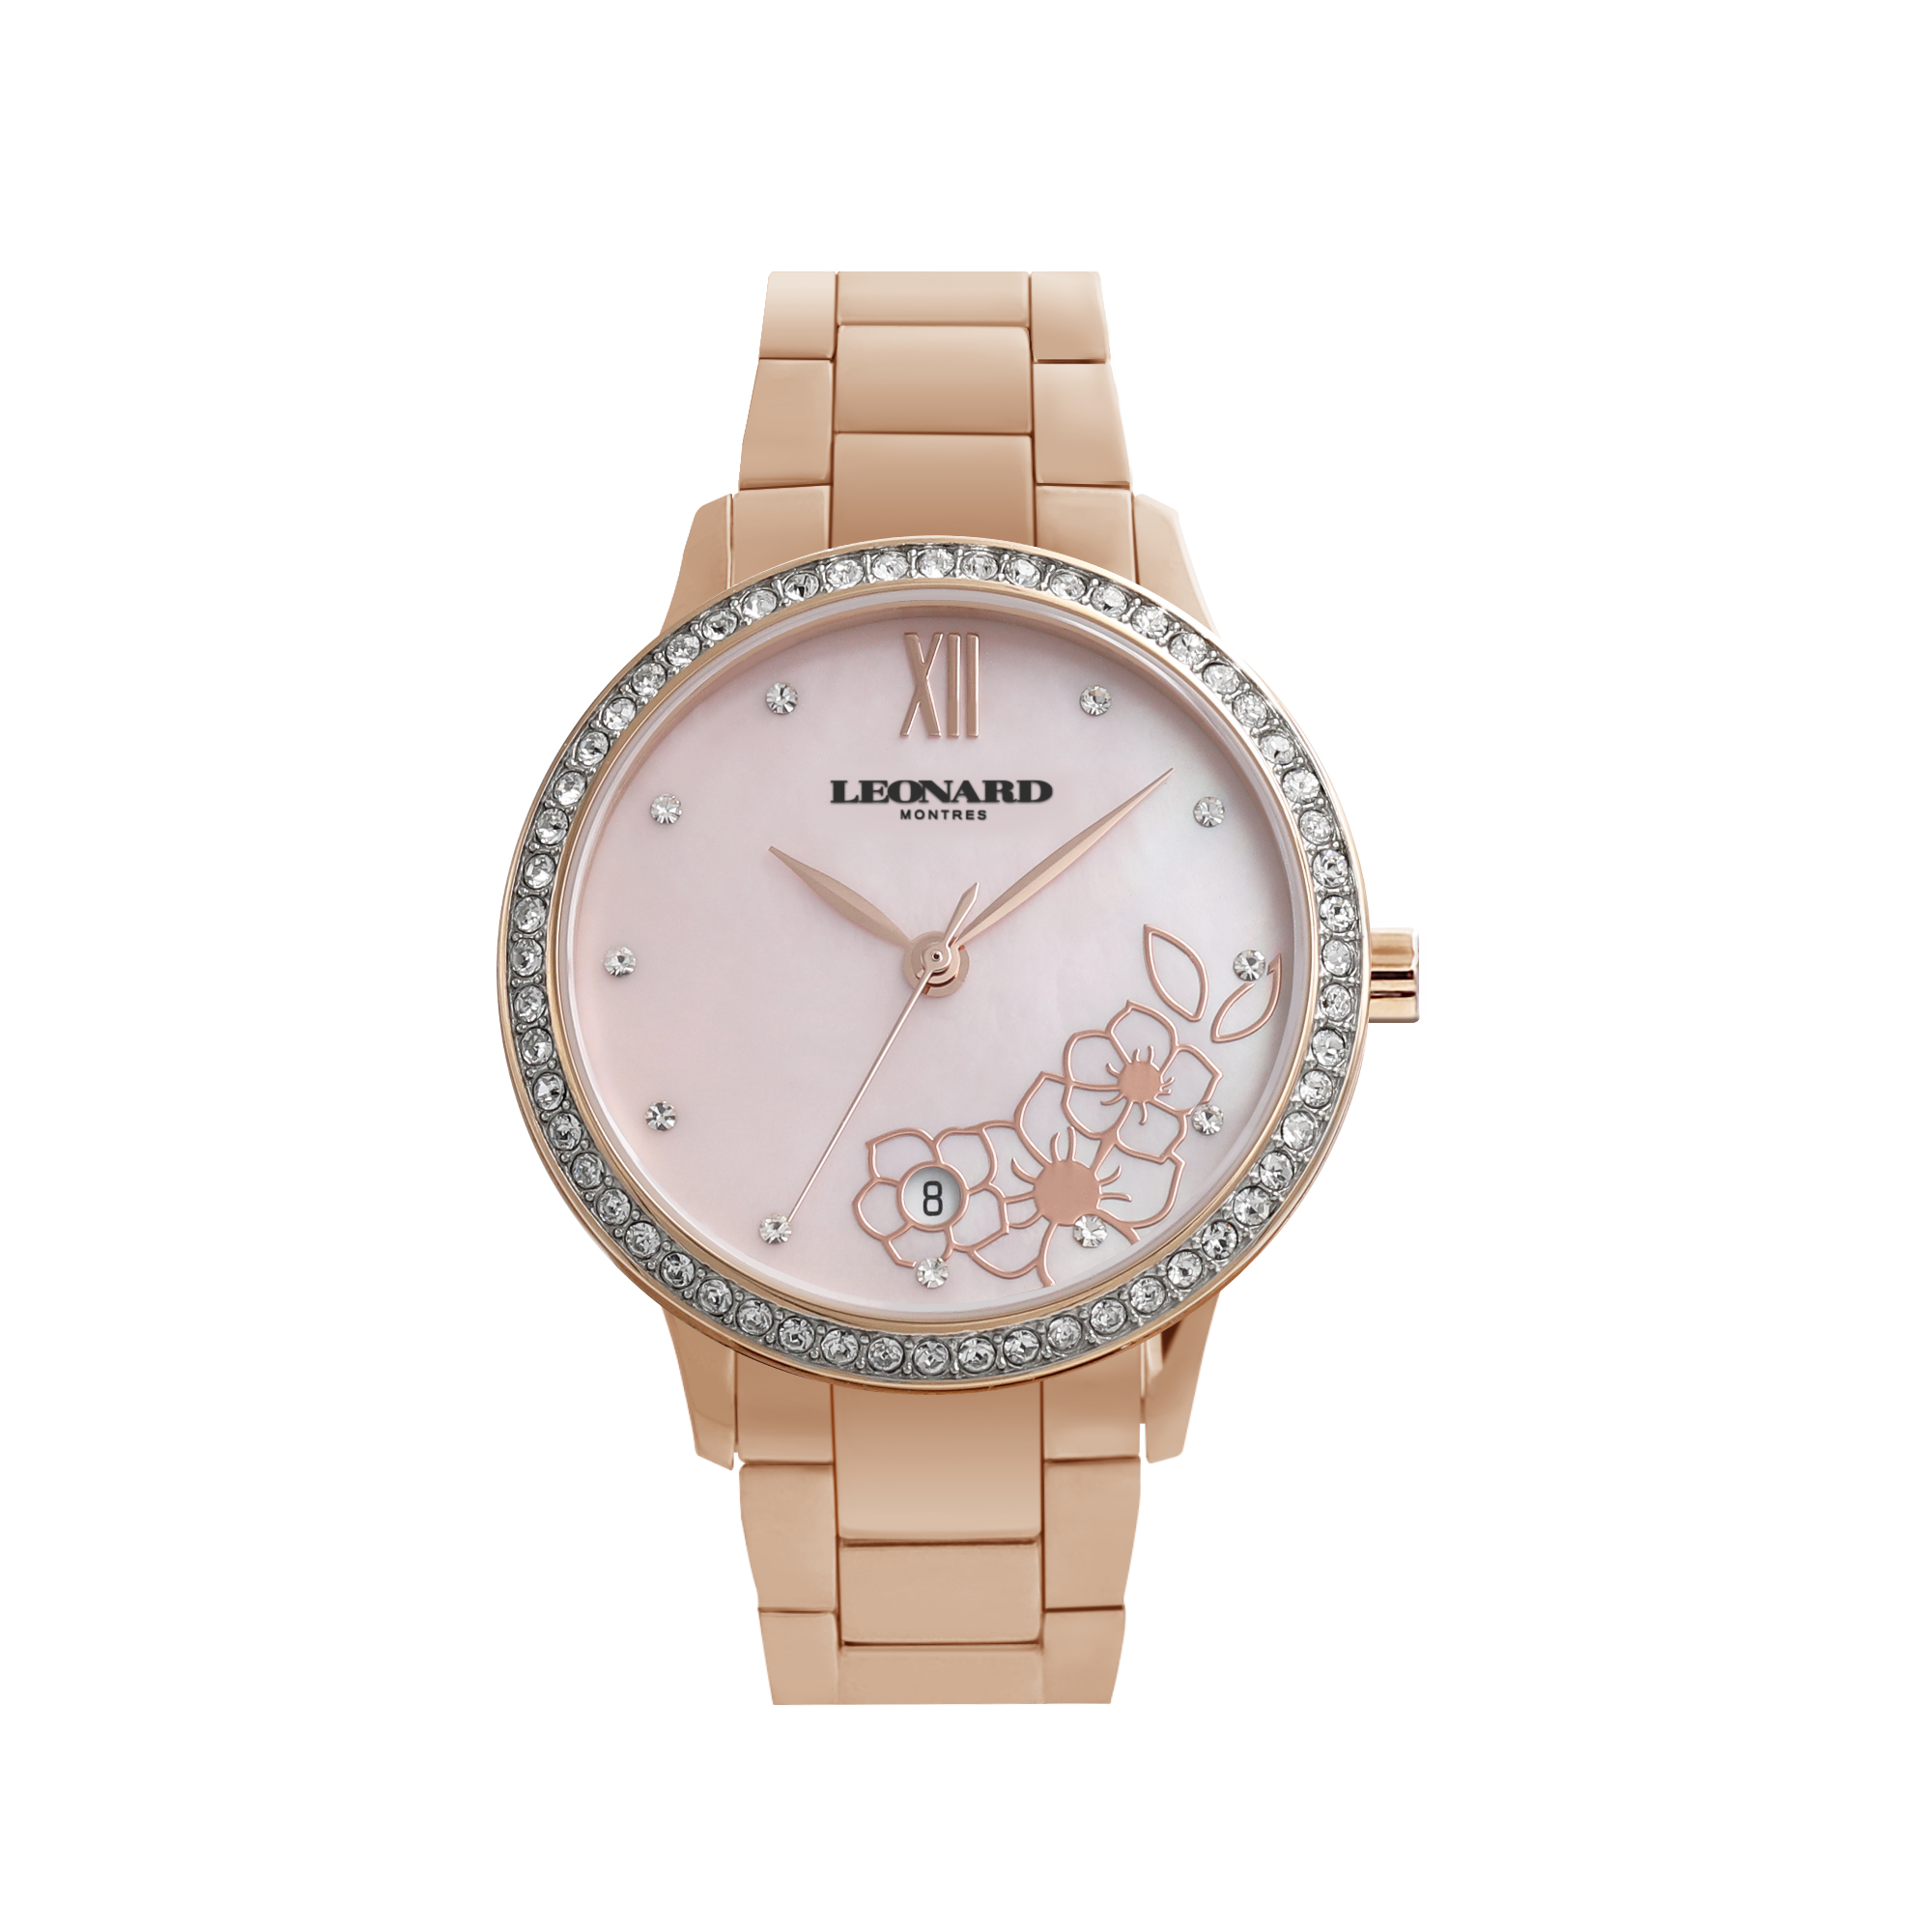 Leonard Montres Swiss ladies watch Mother-of-Pearl dial with floral print.